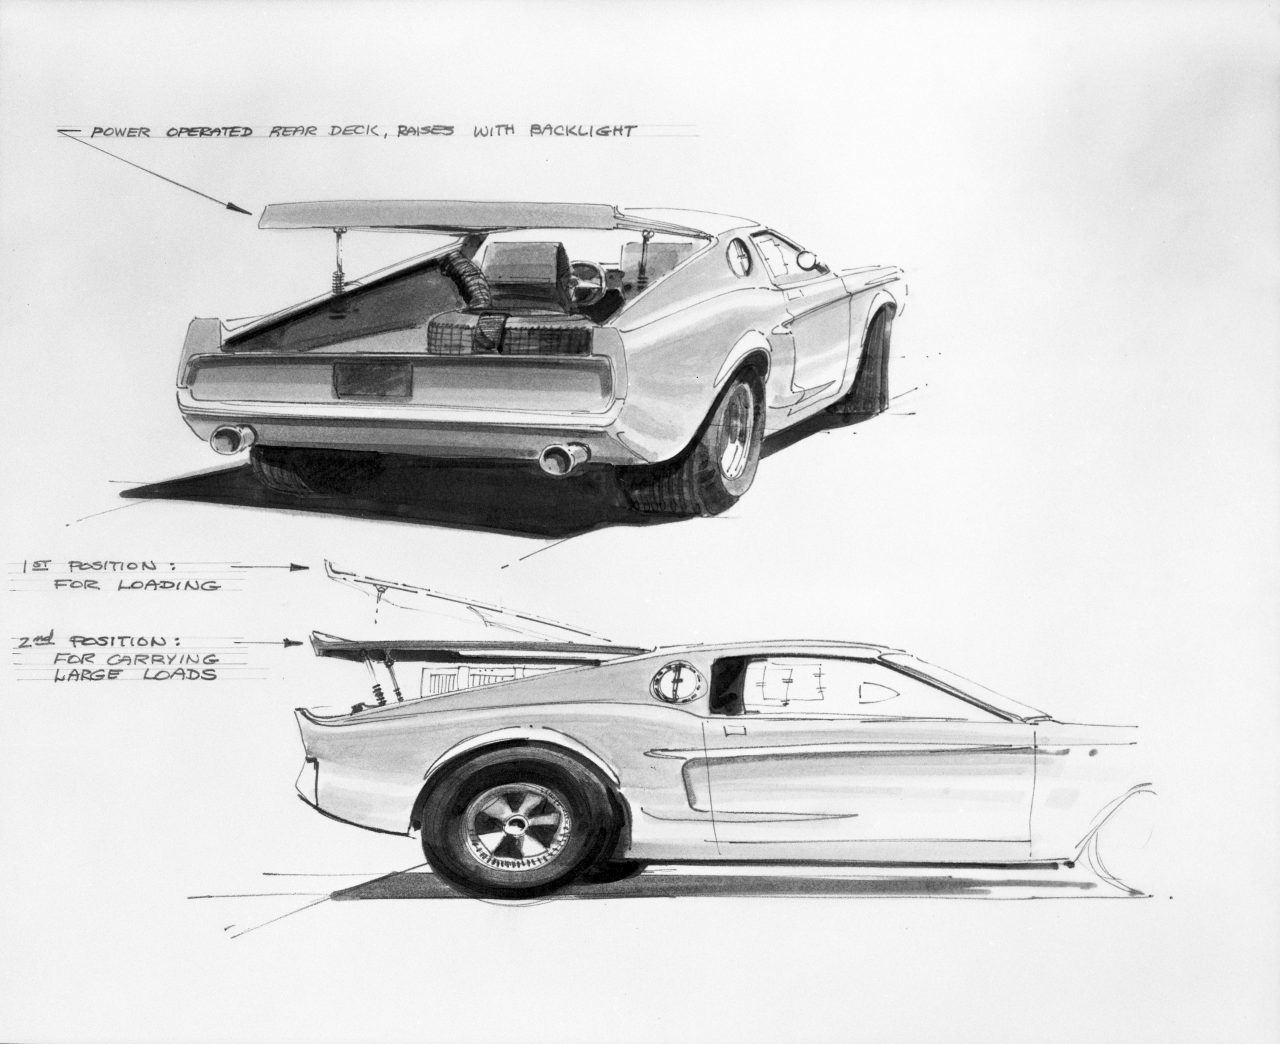 1966 Ford Mustang Mach 1 concept cars, Photo Gallery: 1966 Ford Mustang Mach 1 concept cars, ClassicCars.com Journal